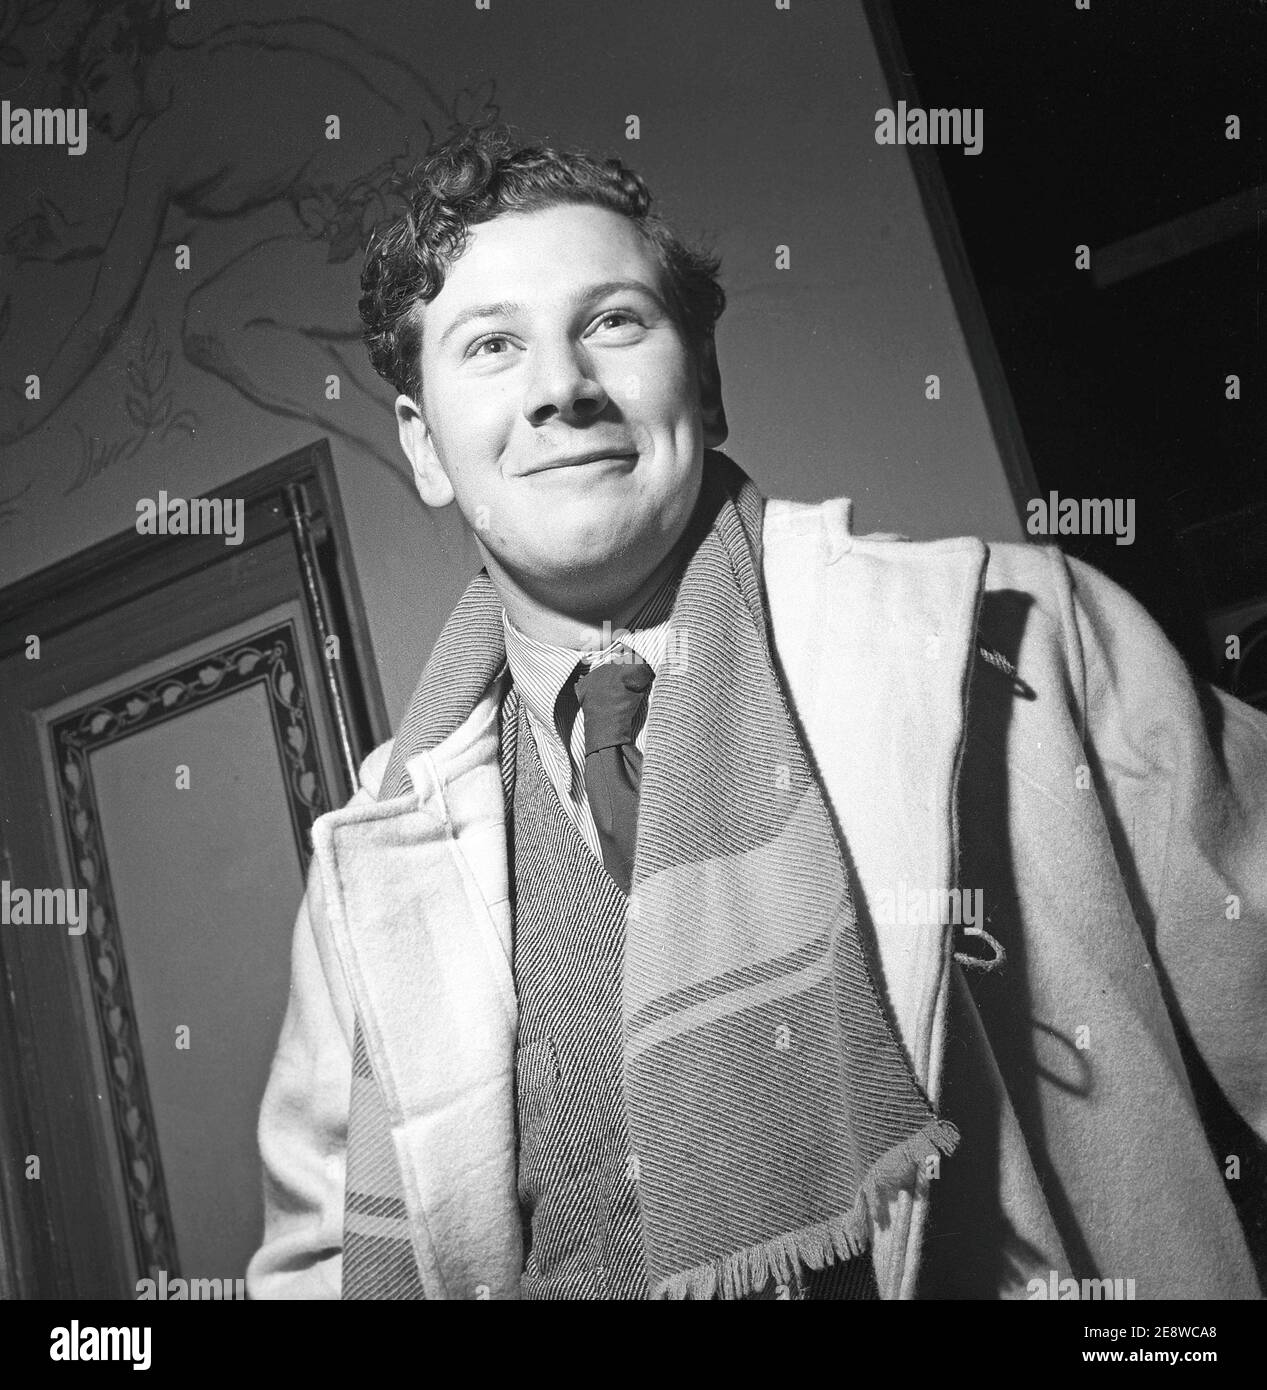 Peter Ustinov. English actor born april 16 1921, died march 28 2004. Pictured during a visit to Sweden 1948 Stock Photo